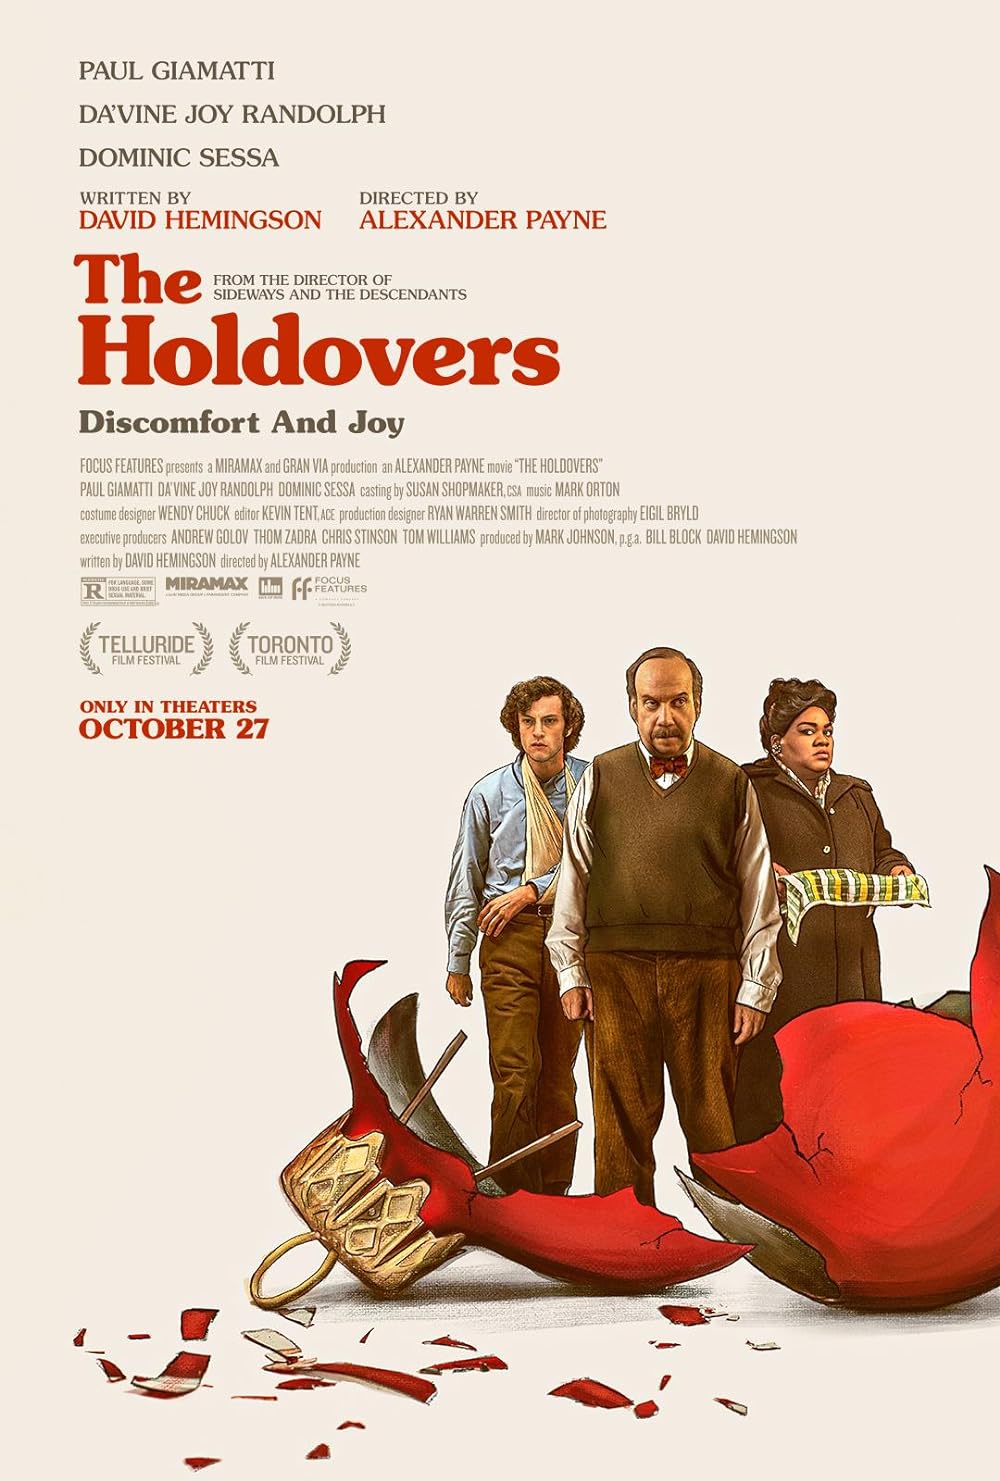 Poster for "The Holdovers"